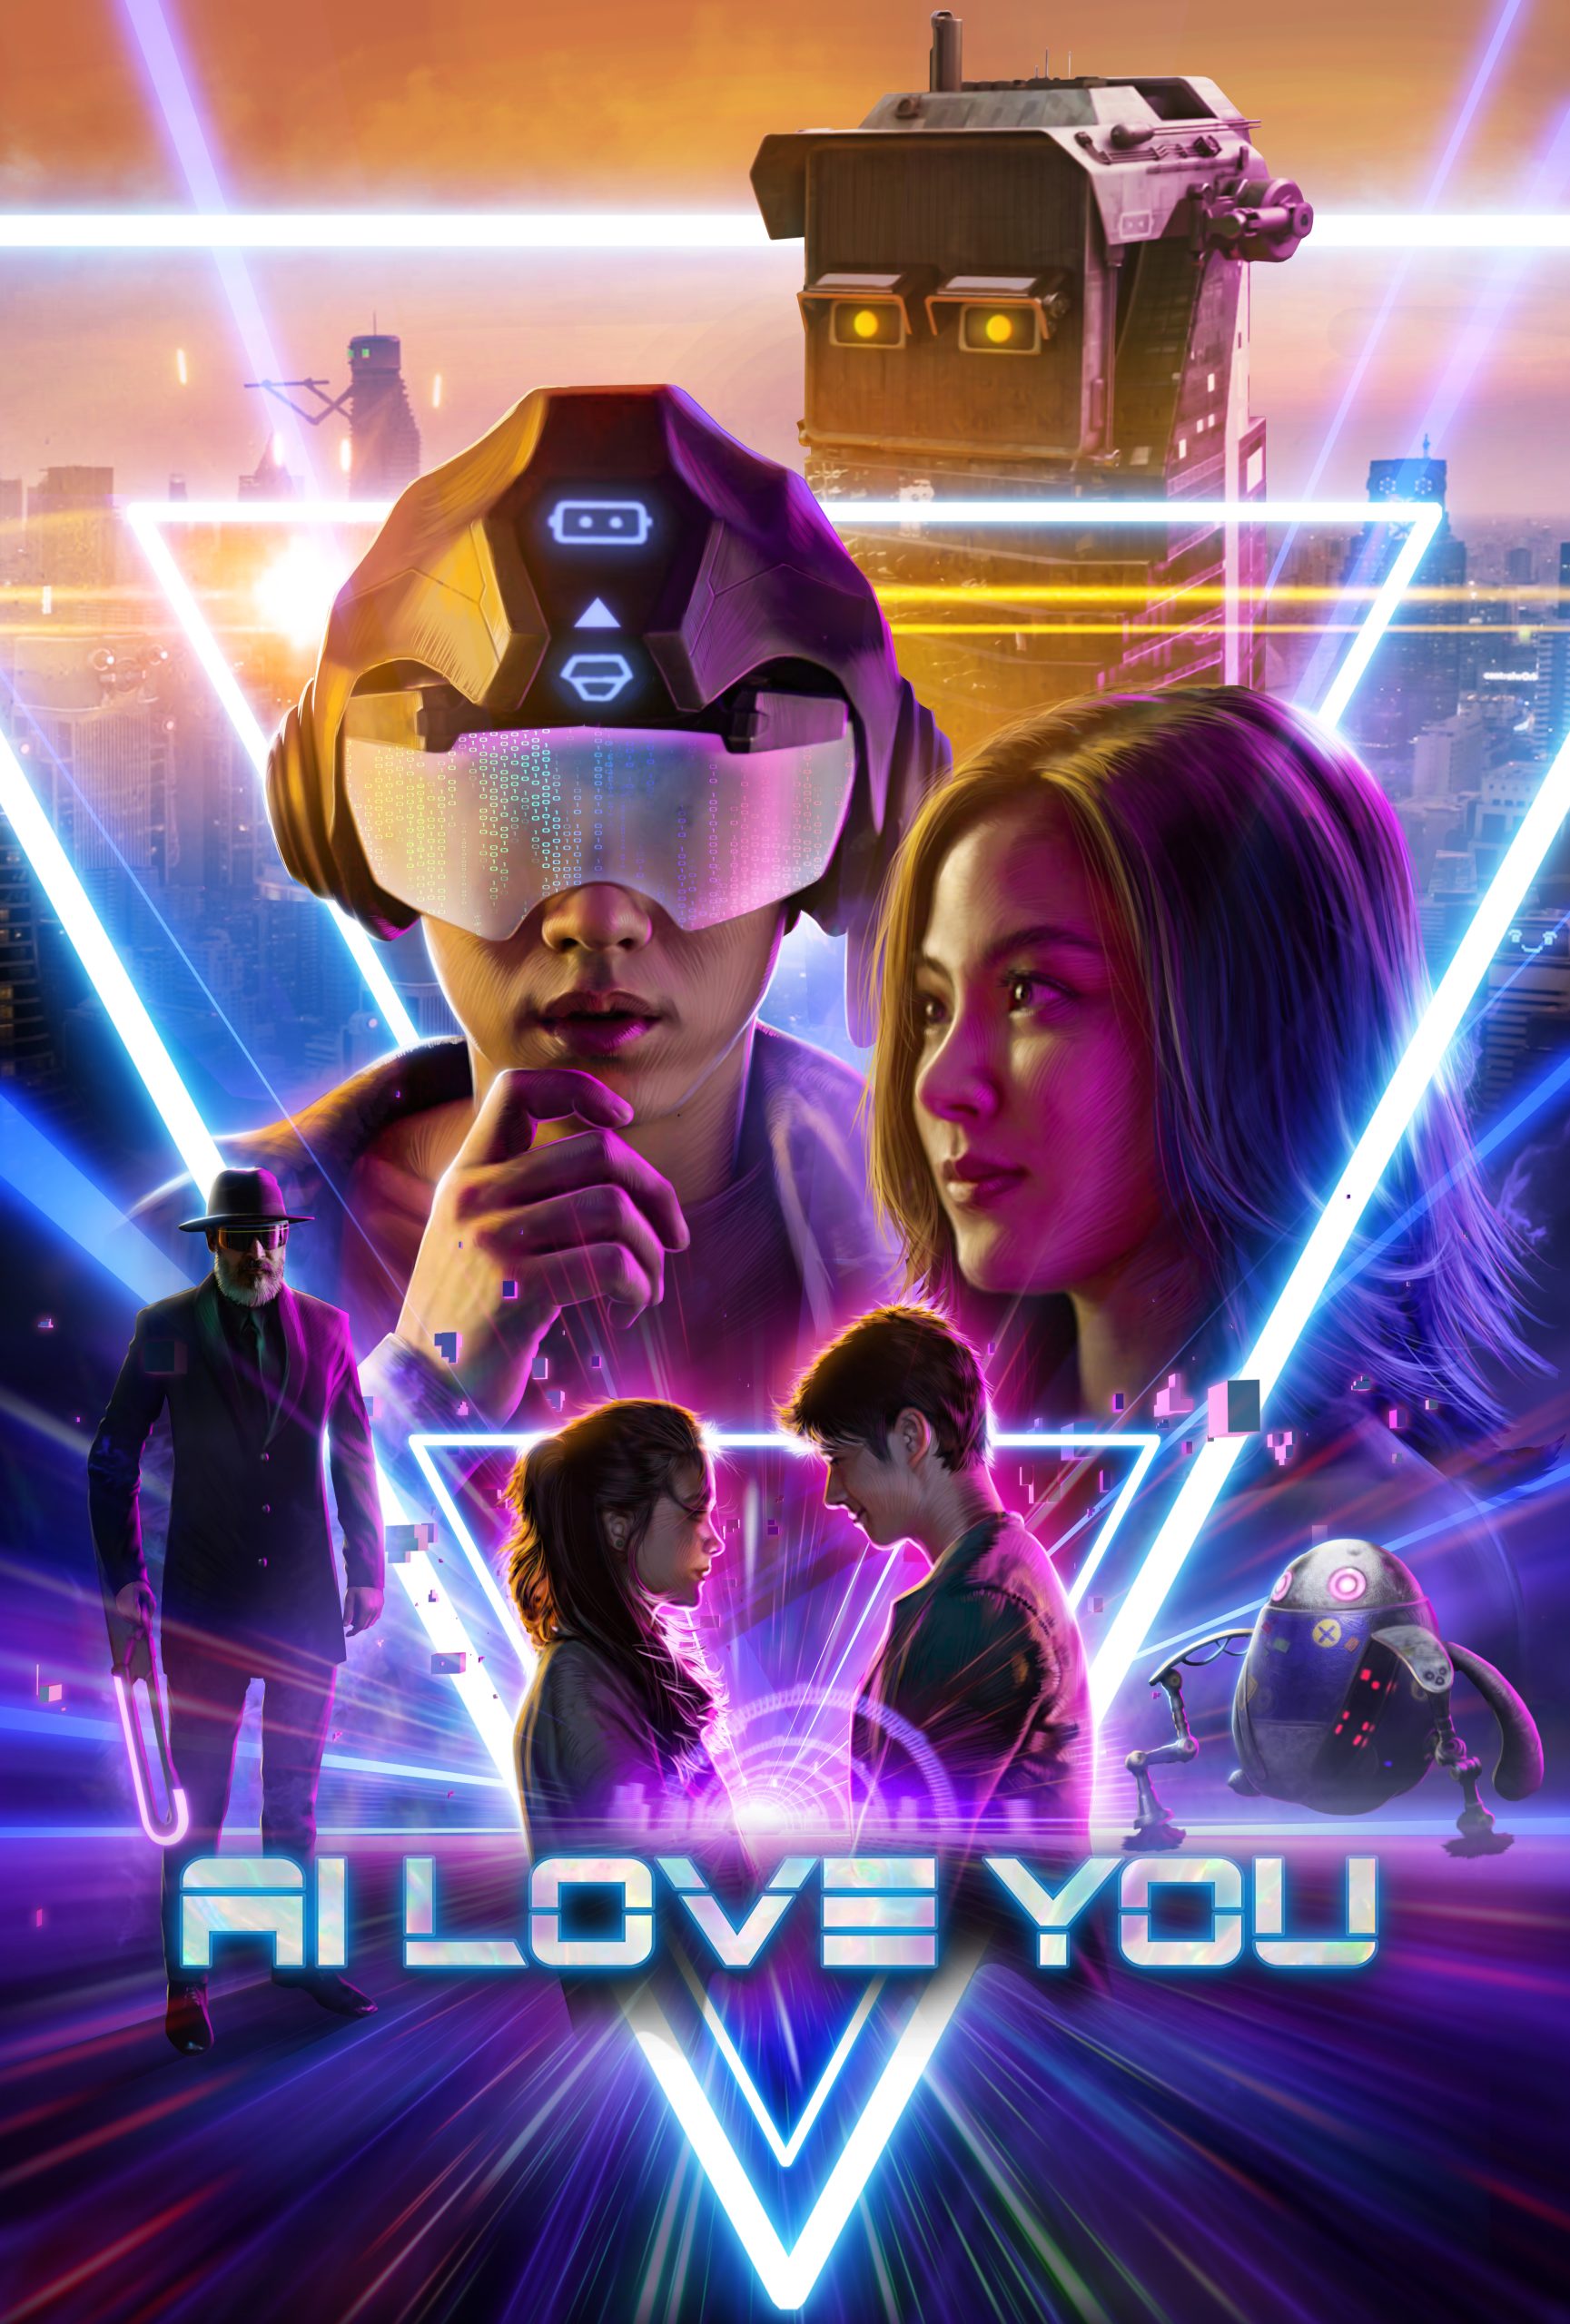 Download THAILAND movie AI Love You